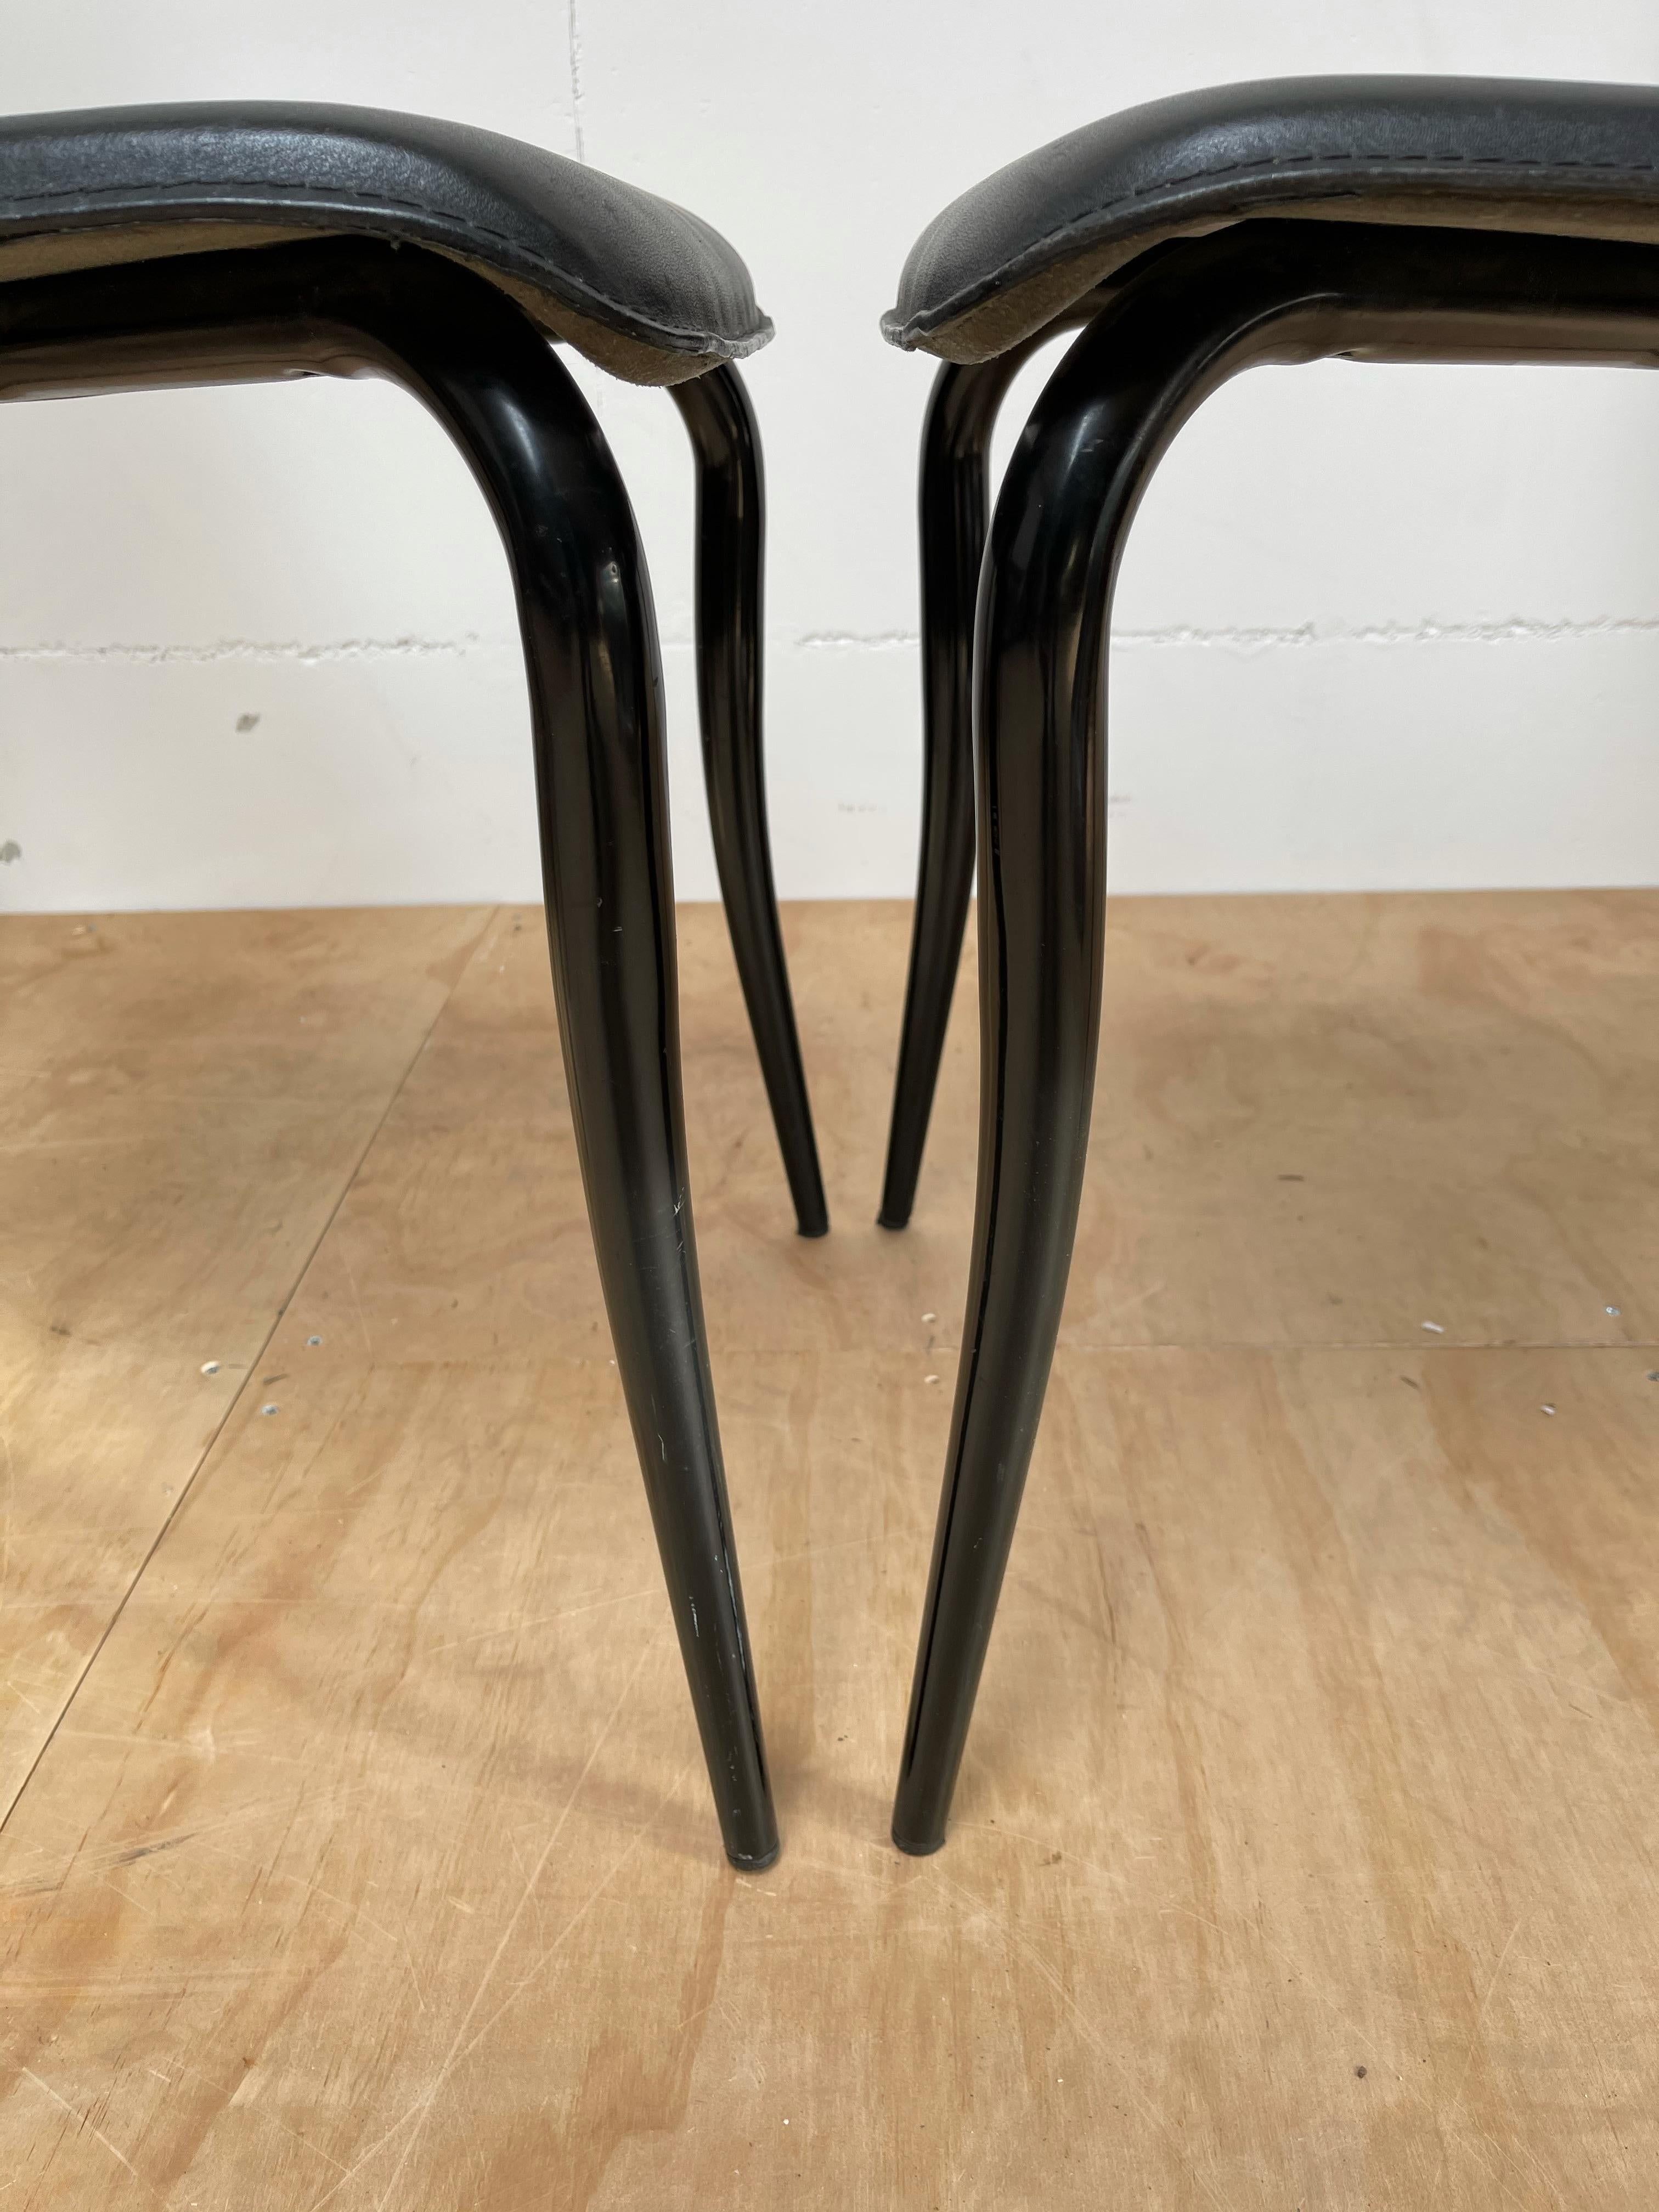 Italian Design Mid-Century Modern Set of 4 Dining Chairs w. Black Leather Seats For Sale 1